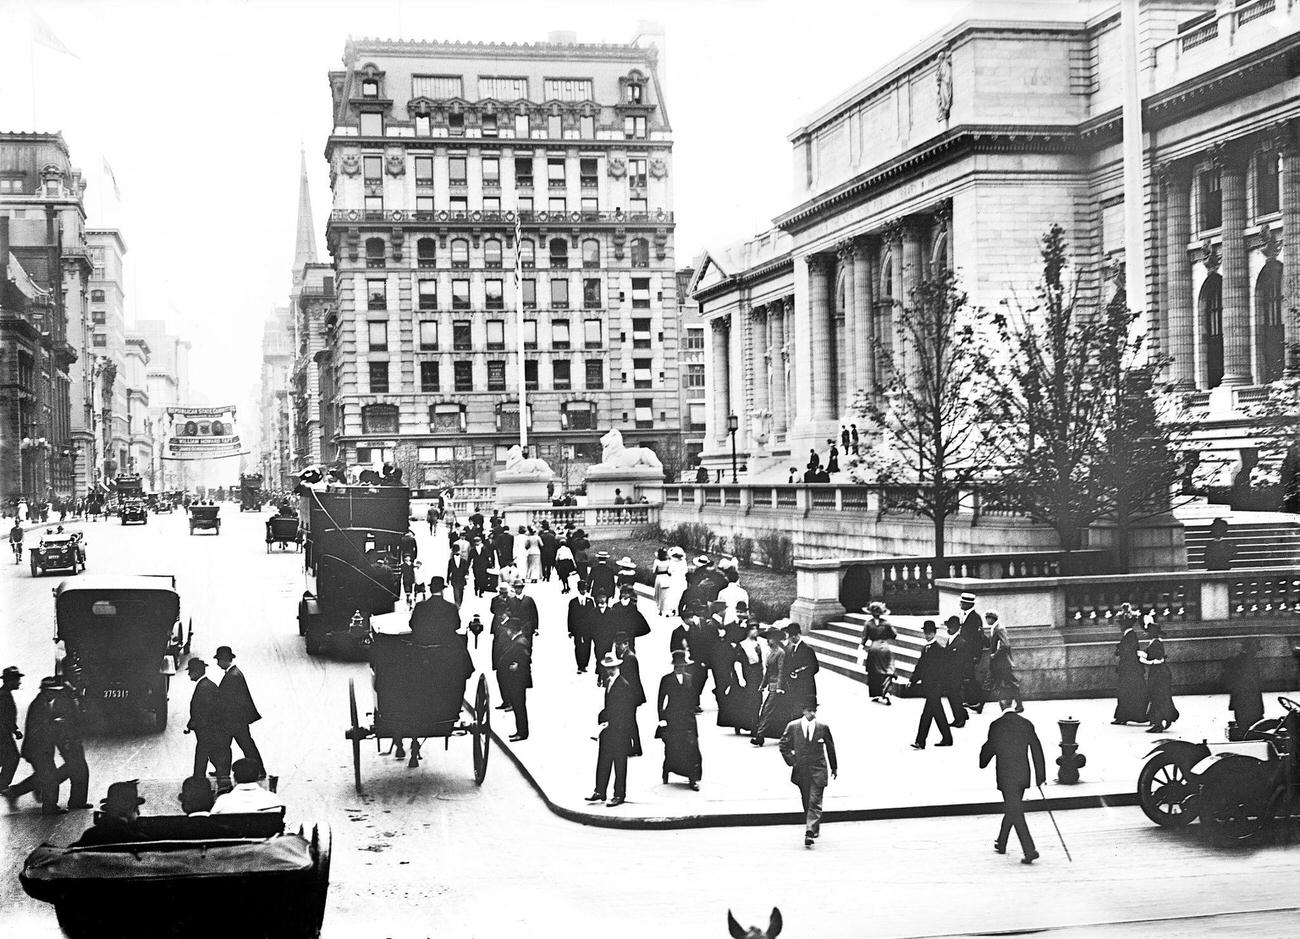 Fifth Avenue And New York Public Library At Forty-Second Street, New York City, New York, Usa, Detroit Publishing Company, 1908